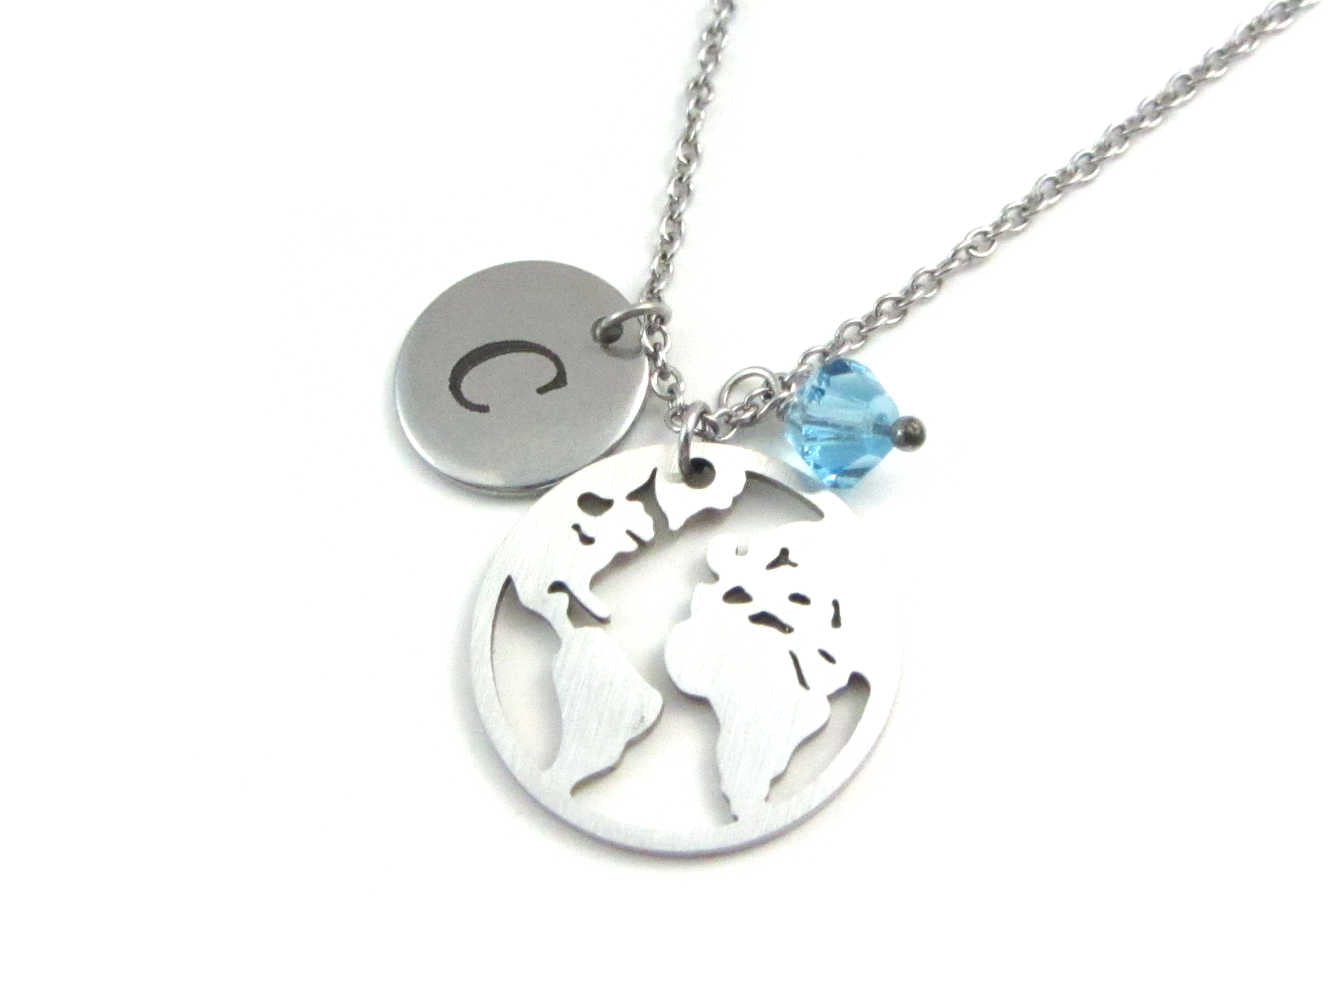 laser engraved capital initial letter disc charm, world globe earth map charm and a light blue crystal charm on a stainless steel chain